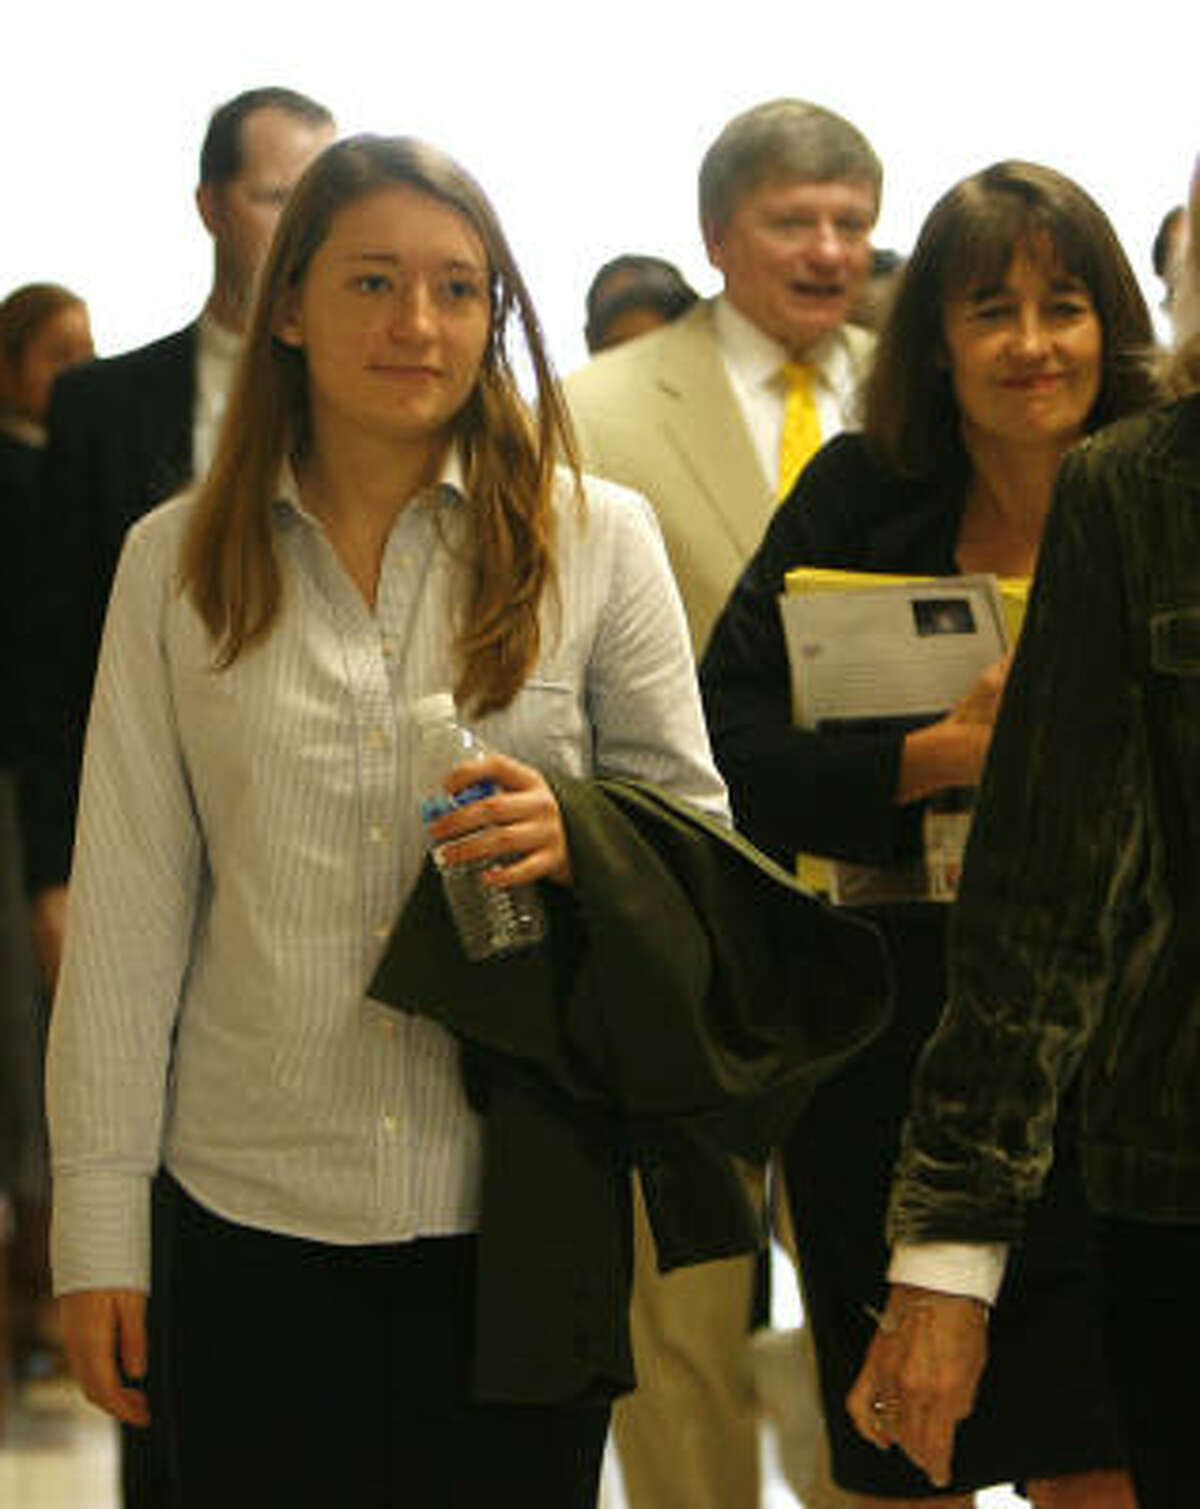 Elena Wells White, foreground, the daughter of Mayor Bill White, walks in the courthouse today with her mother, Andrea White, right.